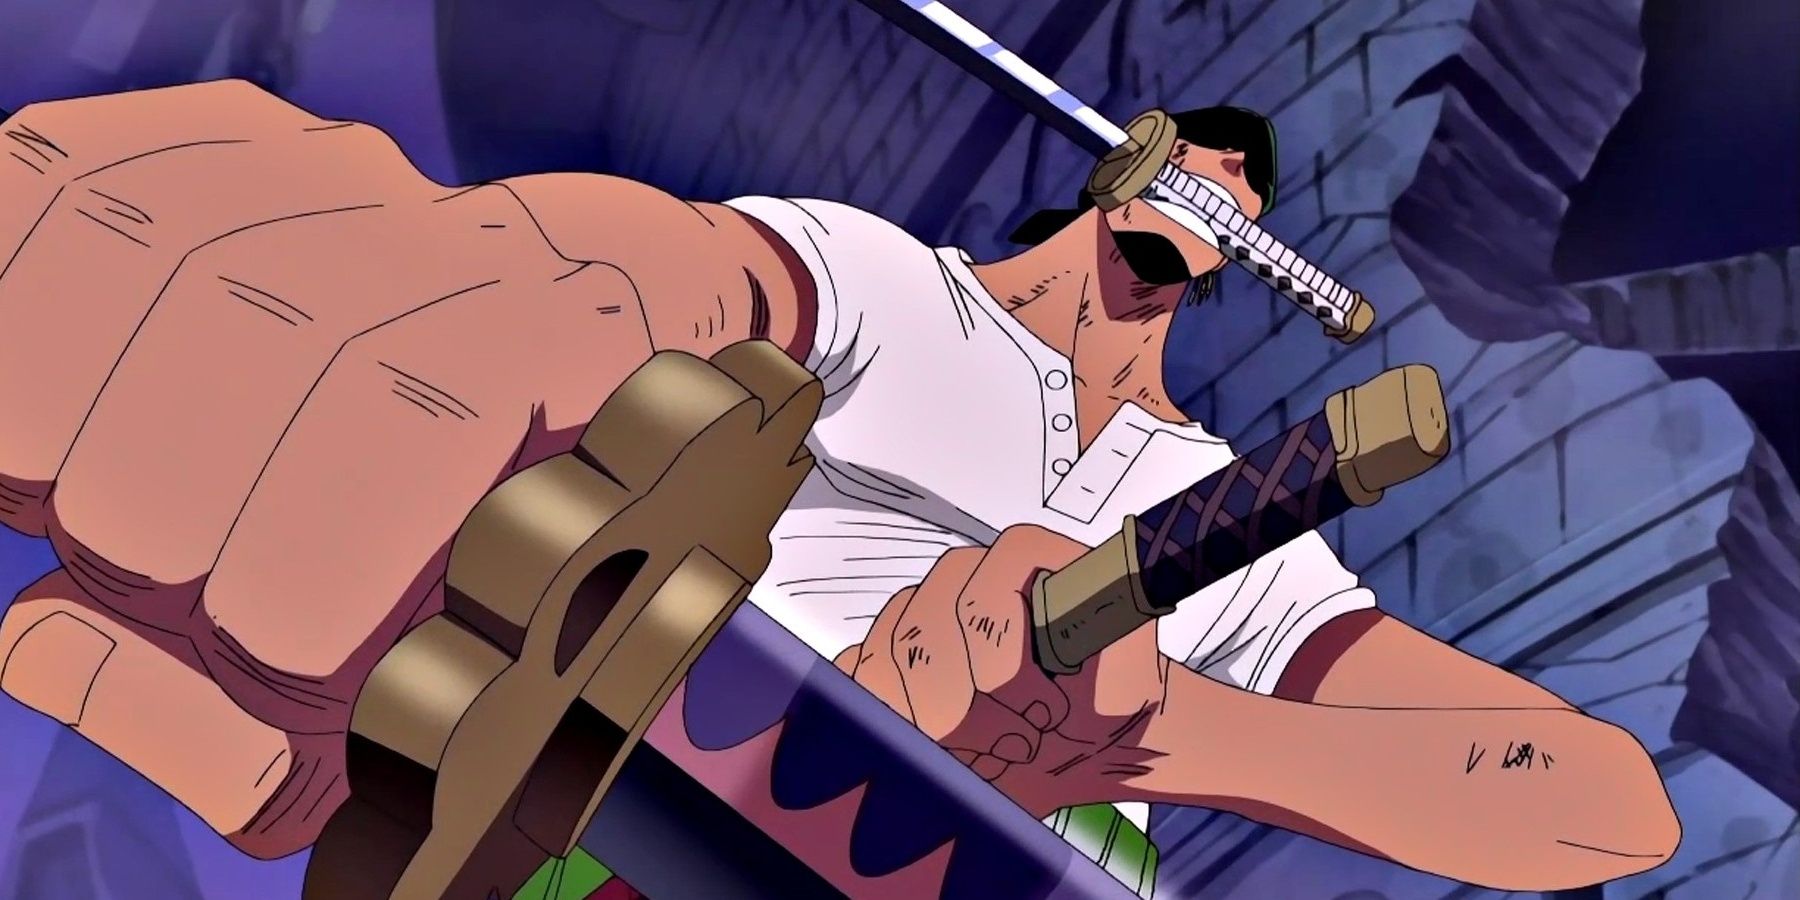 Zoro from One Piece with three swords in Thriller Bark